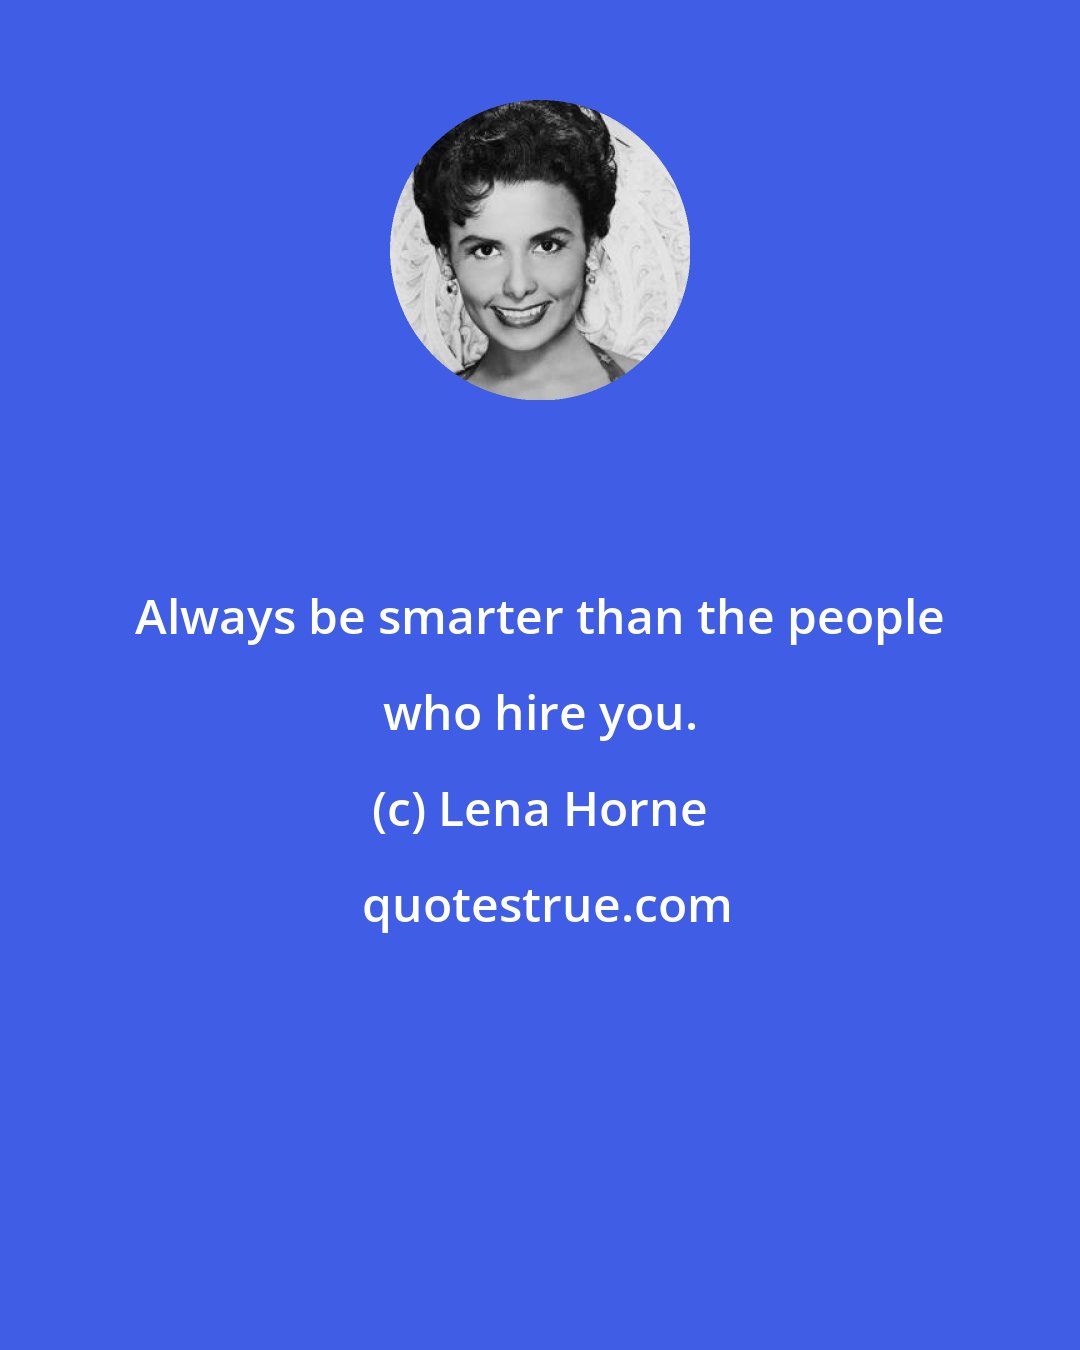 Lena Horne: Always be smarter than the people who hire you.